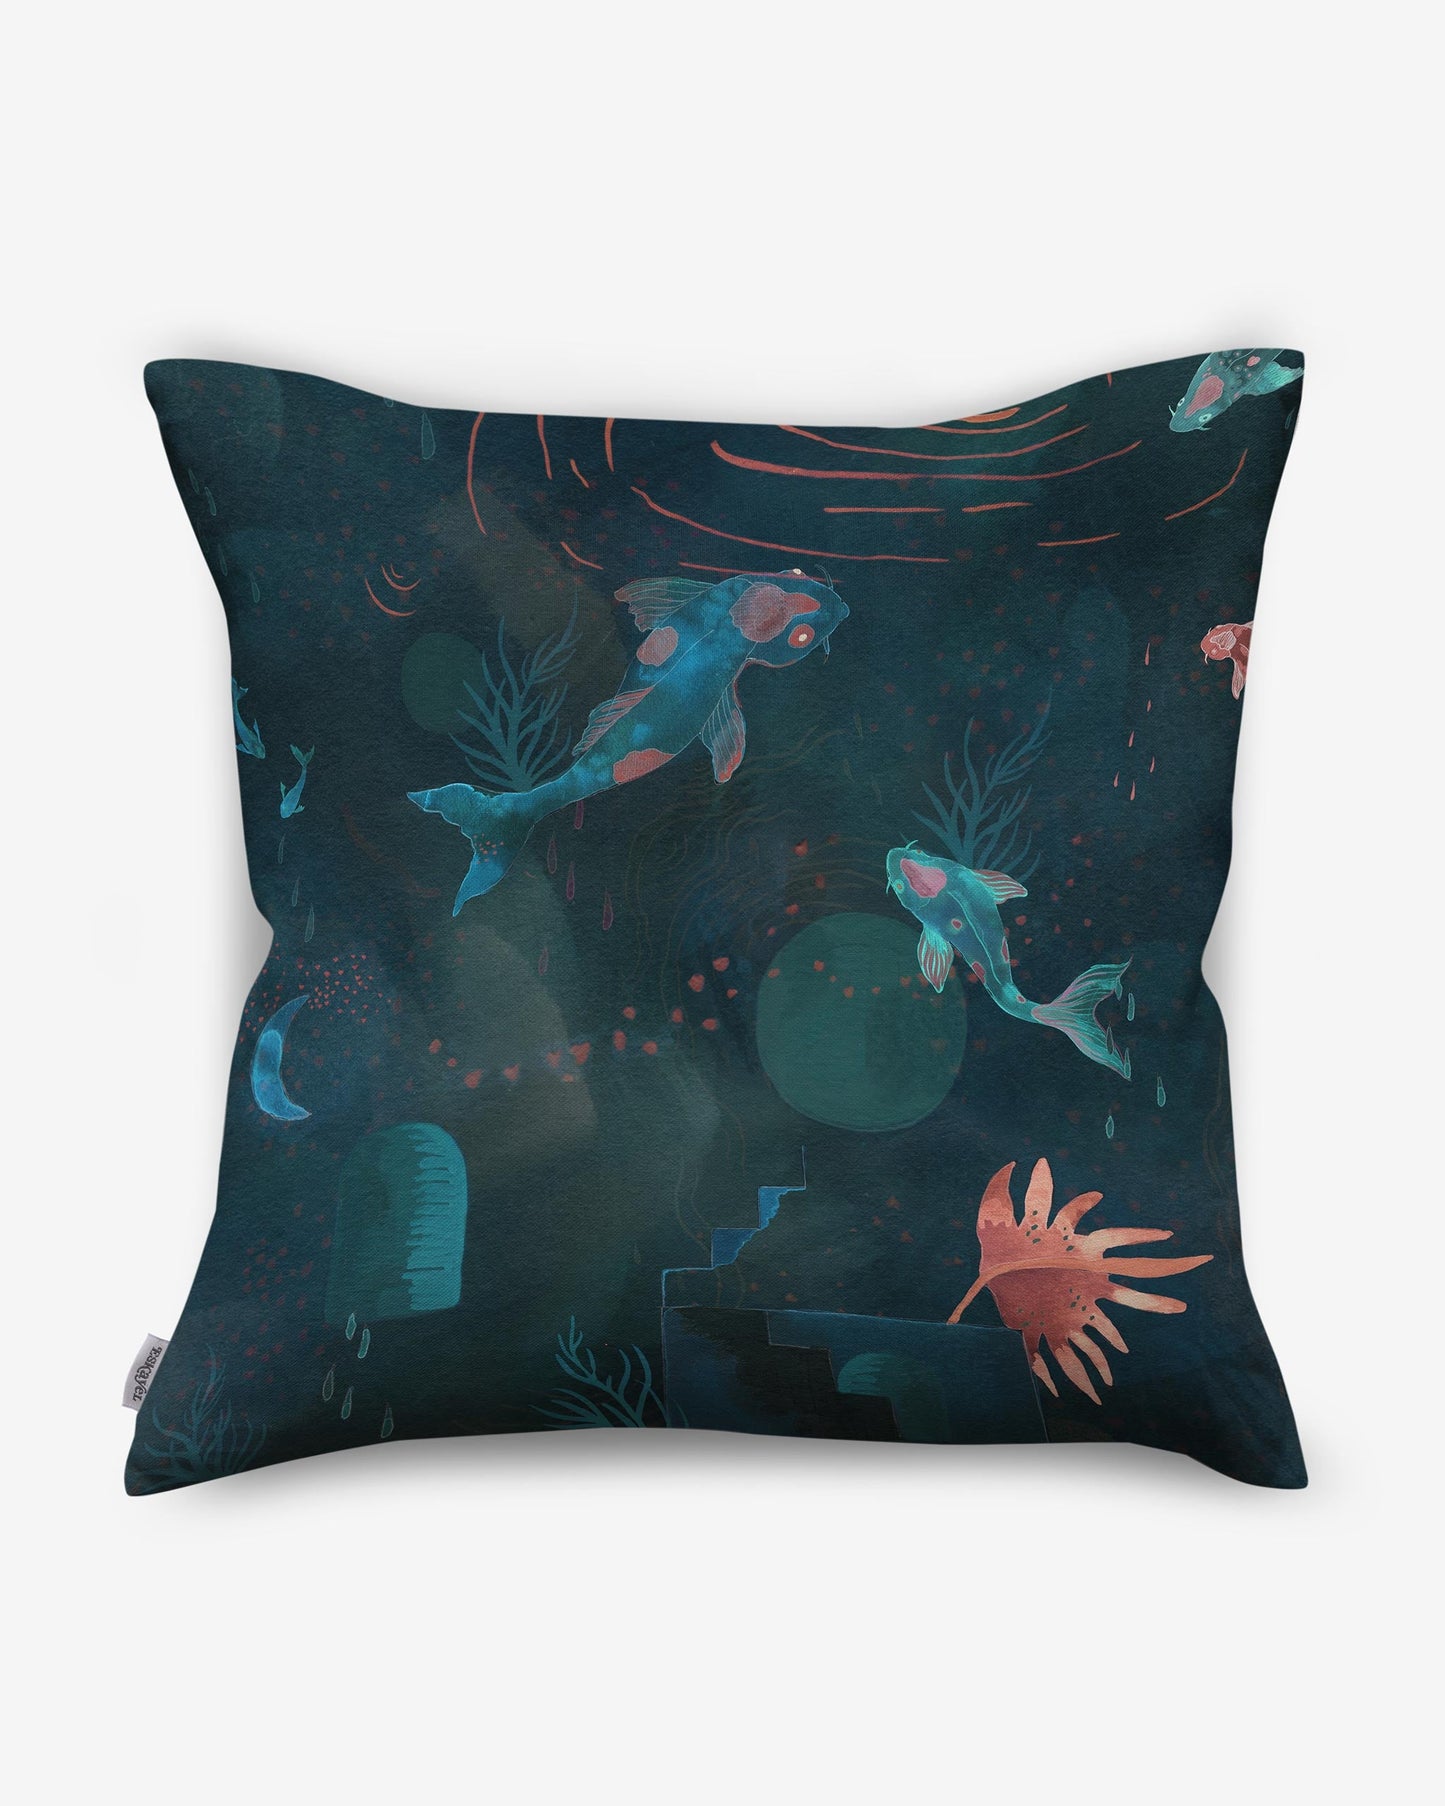 Water Signs Pillow Turquoise Mermaids pillow